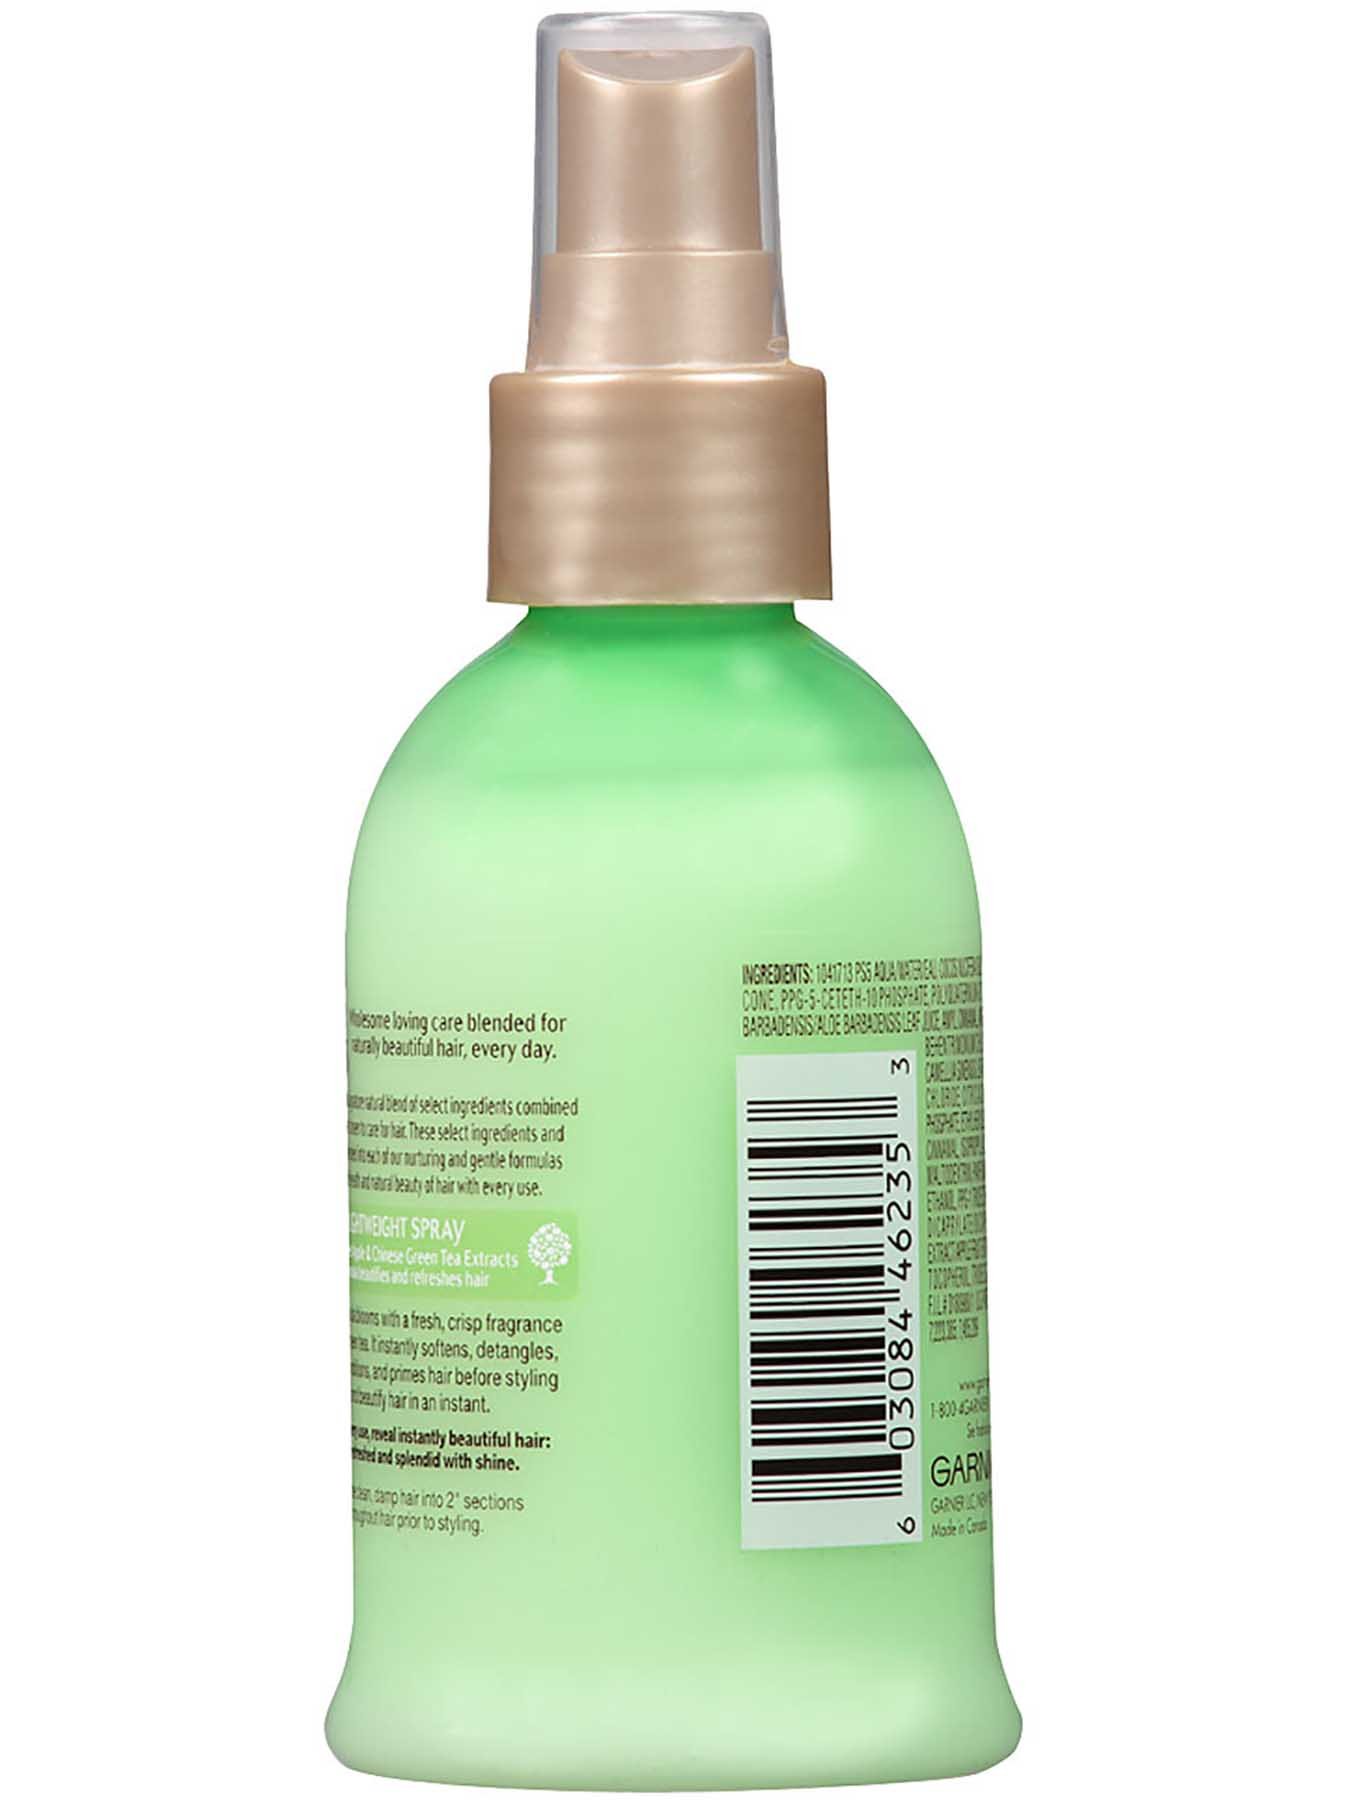 Back view of Refreshing 5-in-1 Lightweight Spray with Green Apple and Green Tea Extracts.